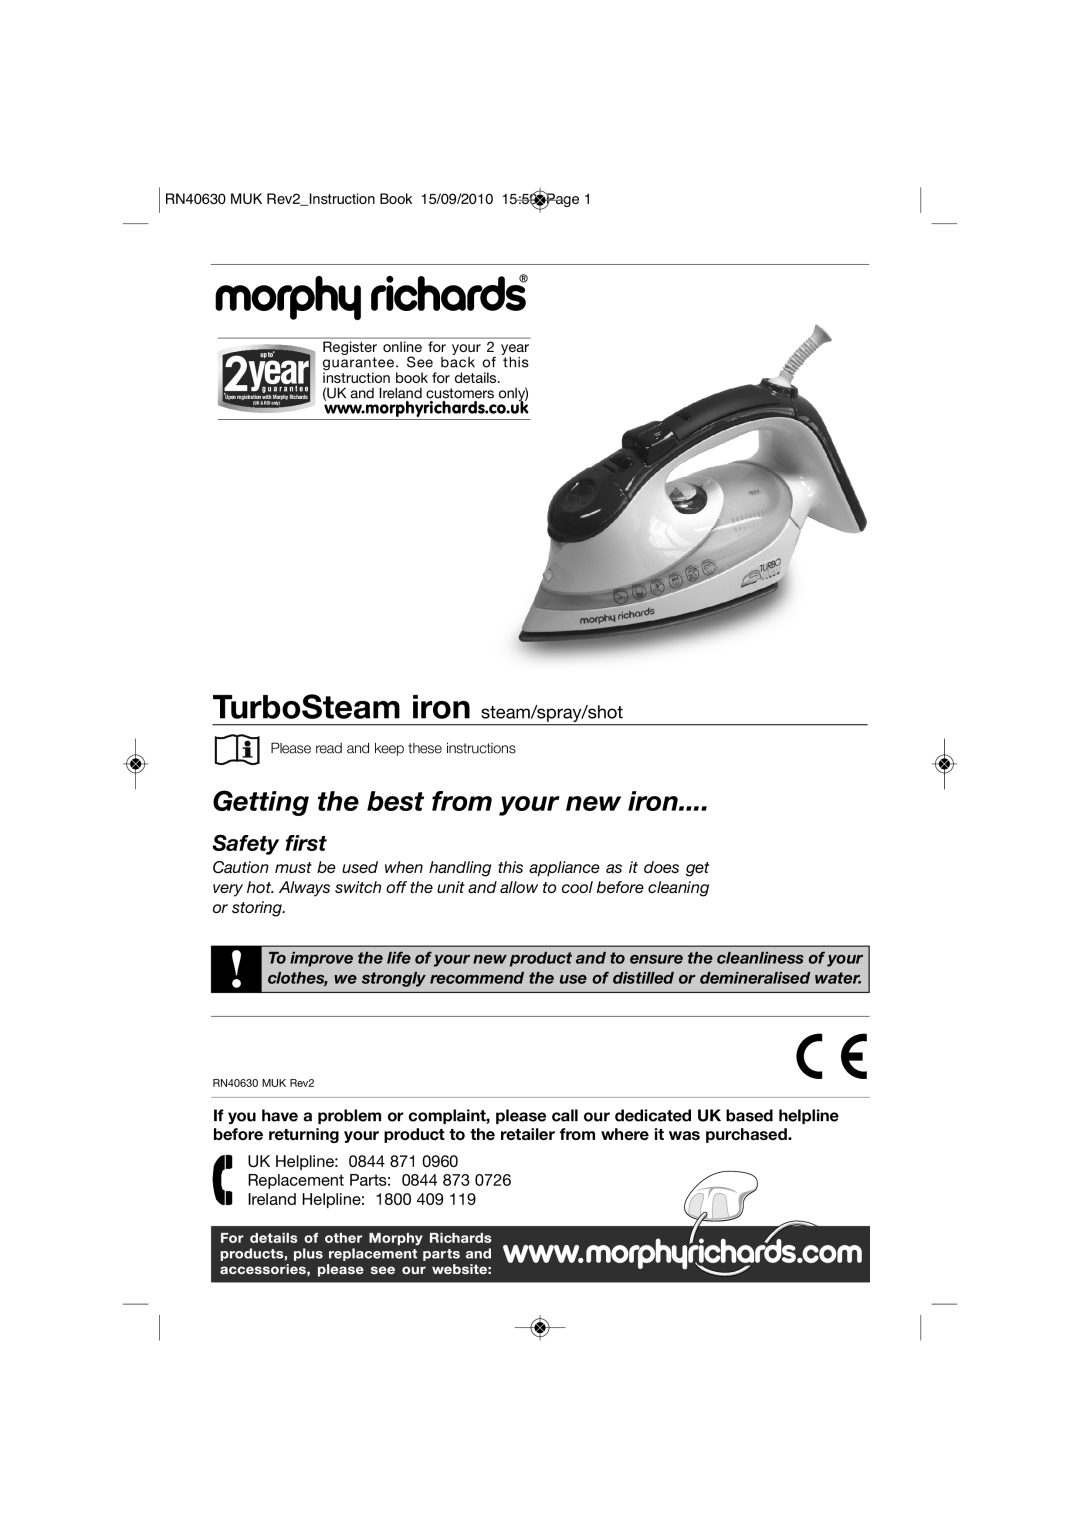 Morphy Richards RN40630 MUK REV2 manual TurboSteam iron steam/spray/shot, Getting the best from your new iron 